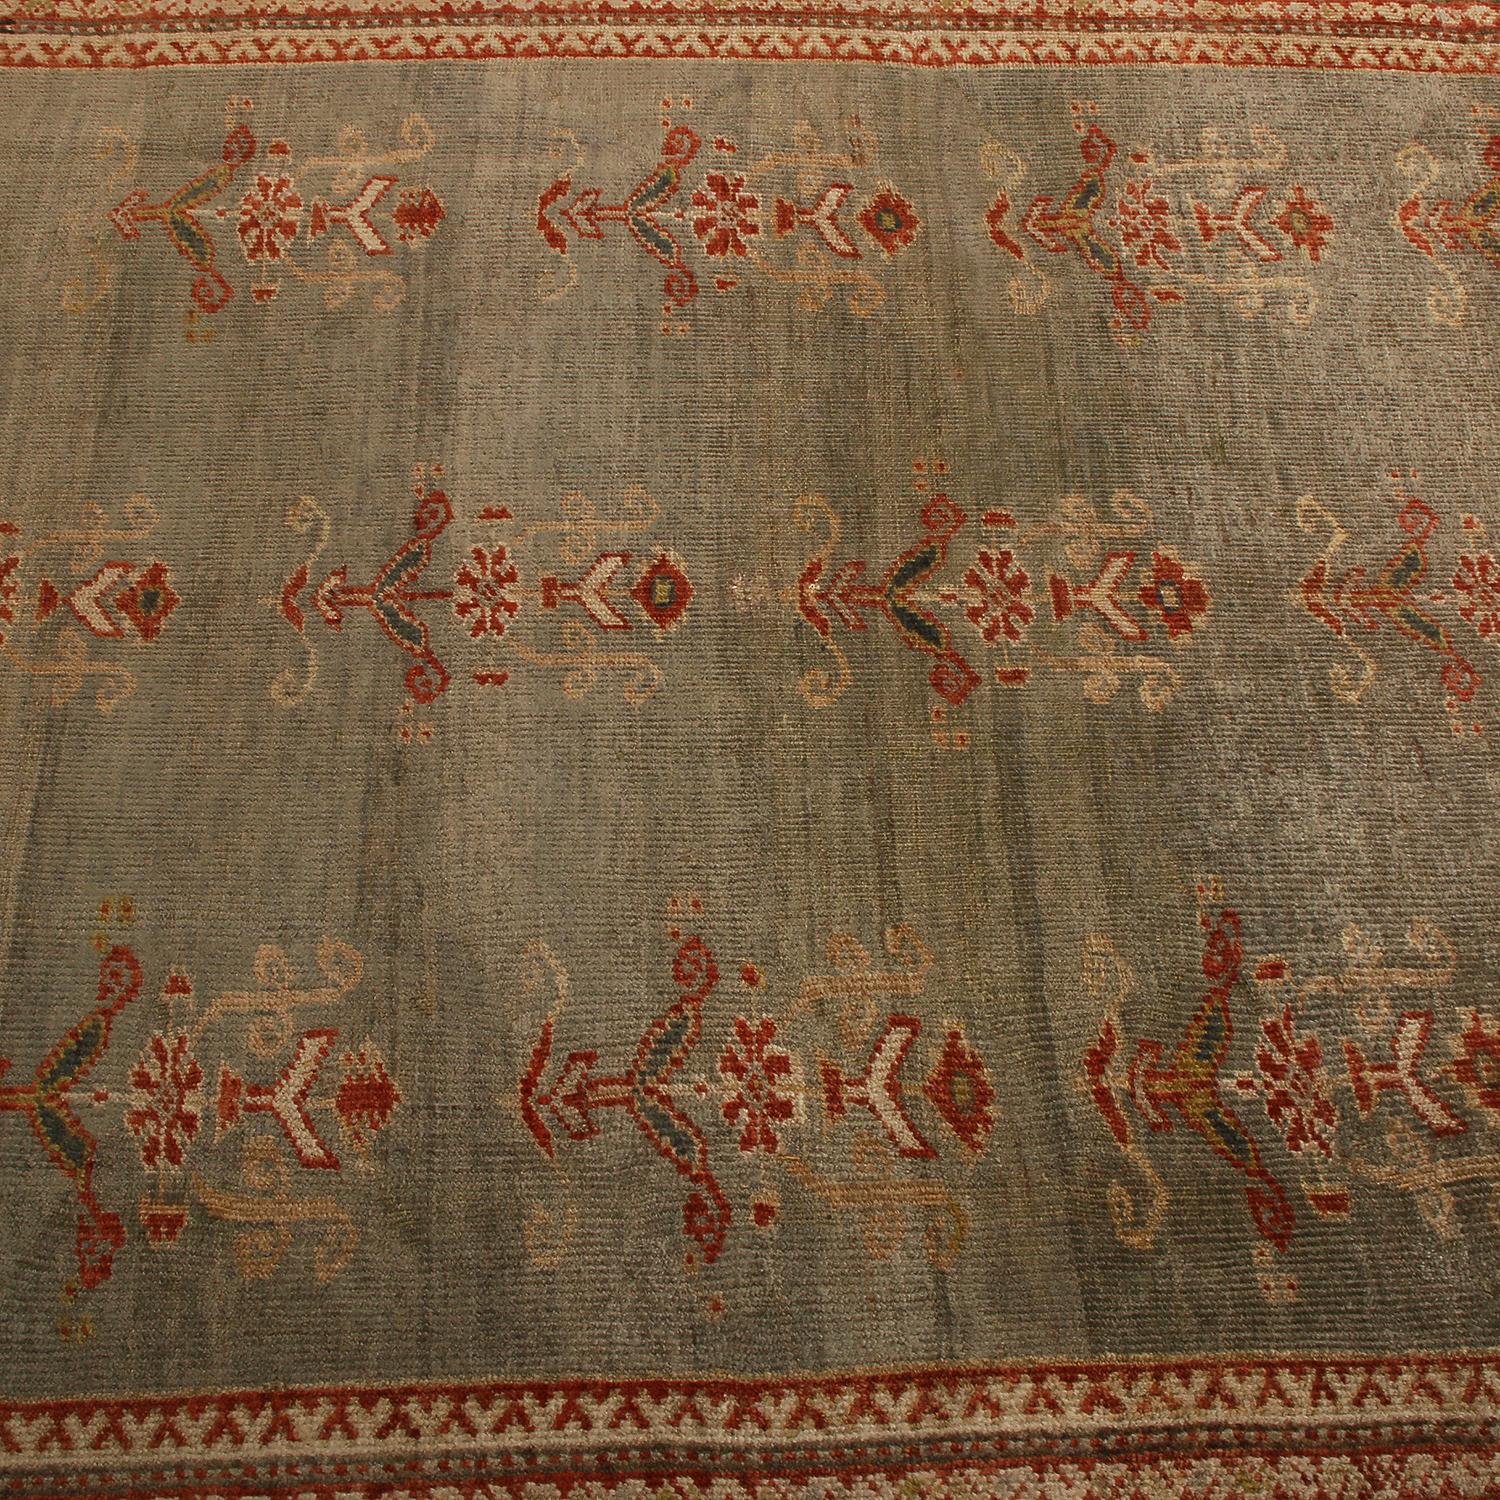 Antique Sultanabad Blue and Burgundy Wool Persian Rug with Gold-Brown Highlights 1